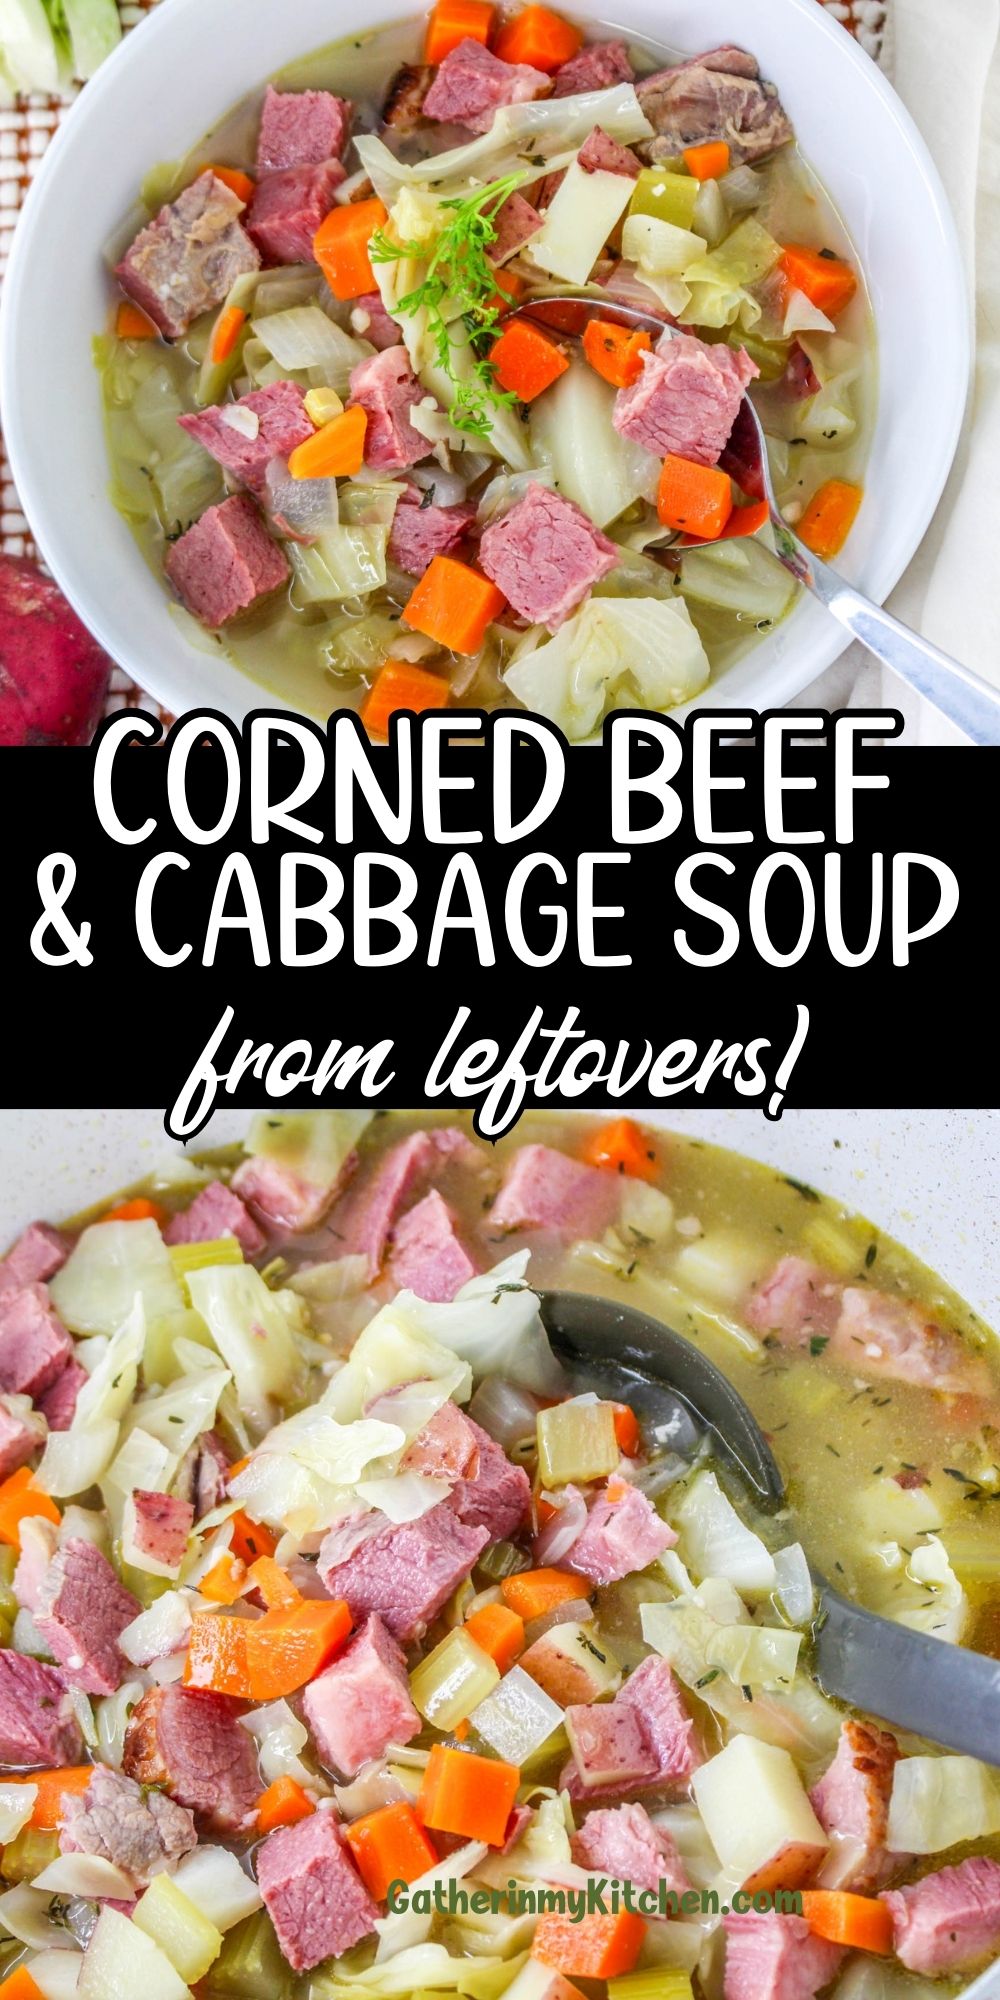 Pin image: top and bottom are corned beef & cabbage soup pics, middle says "Corned beef & cabbage soup from leftovers!".